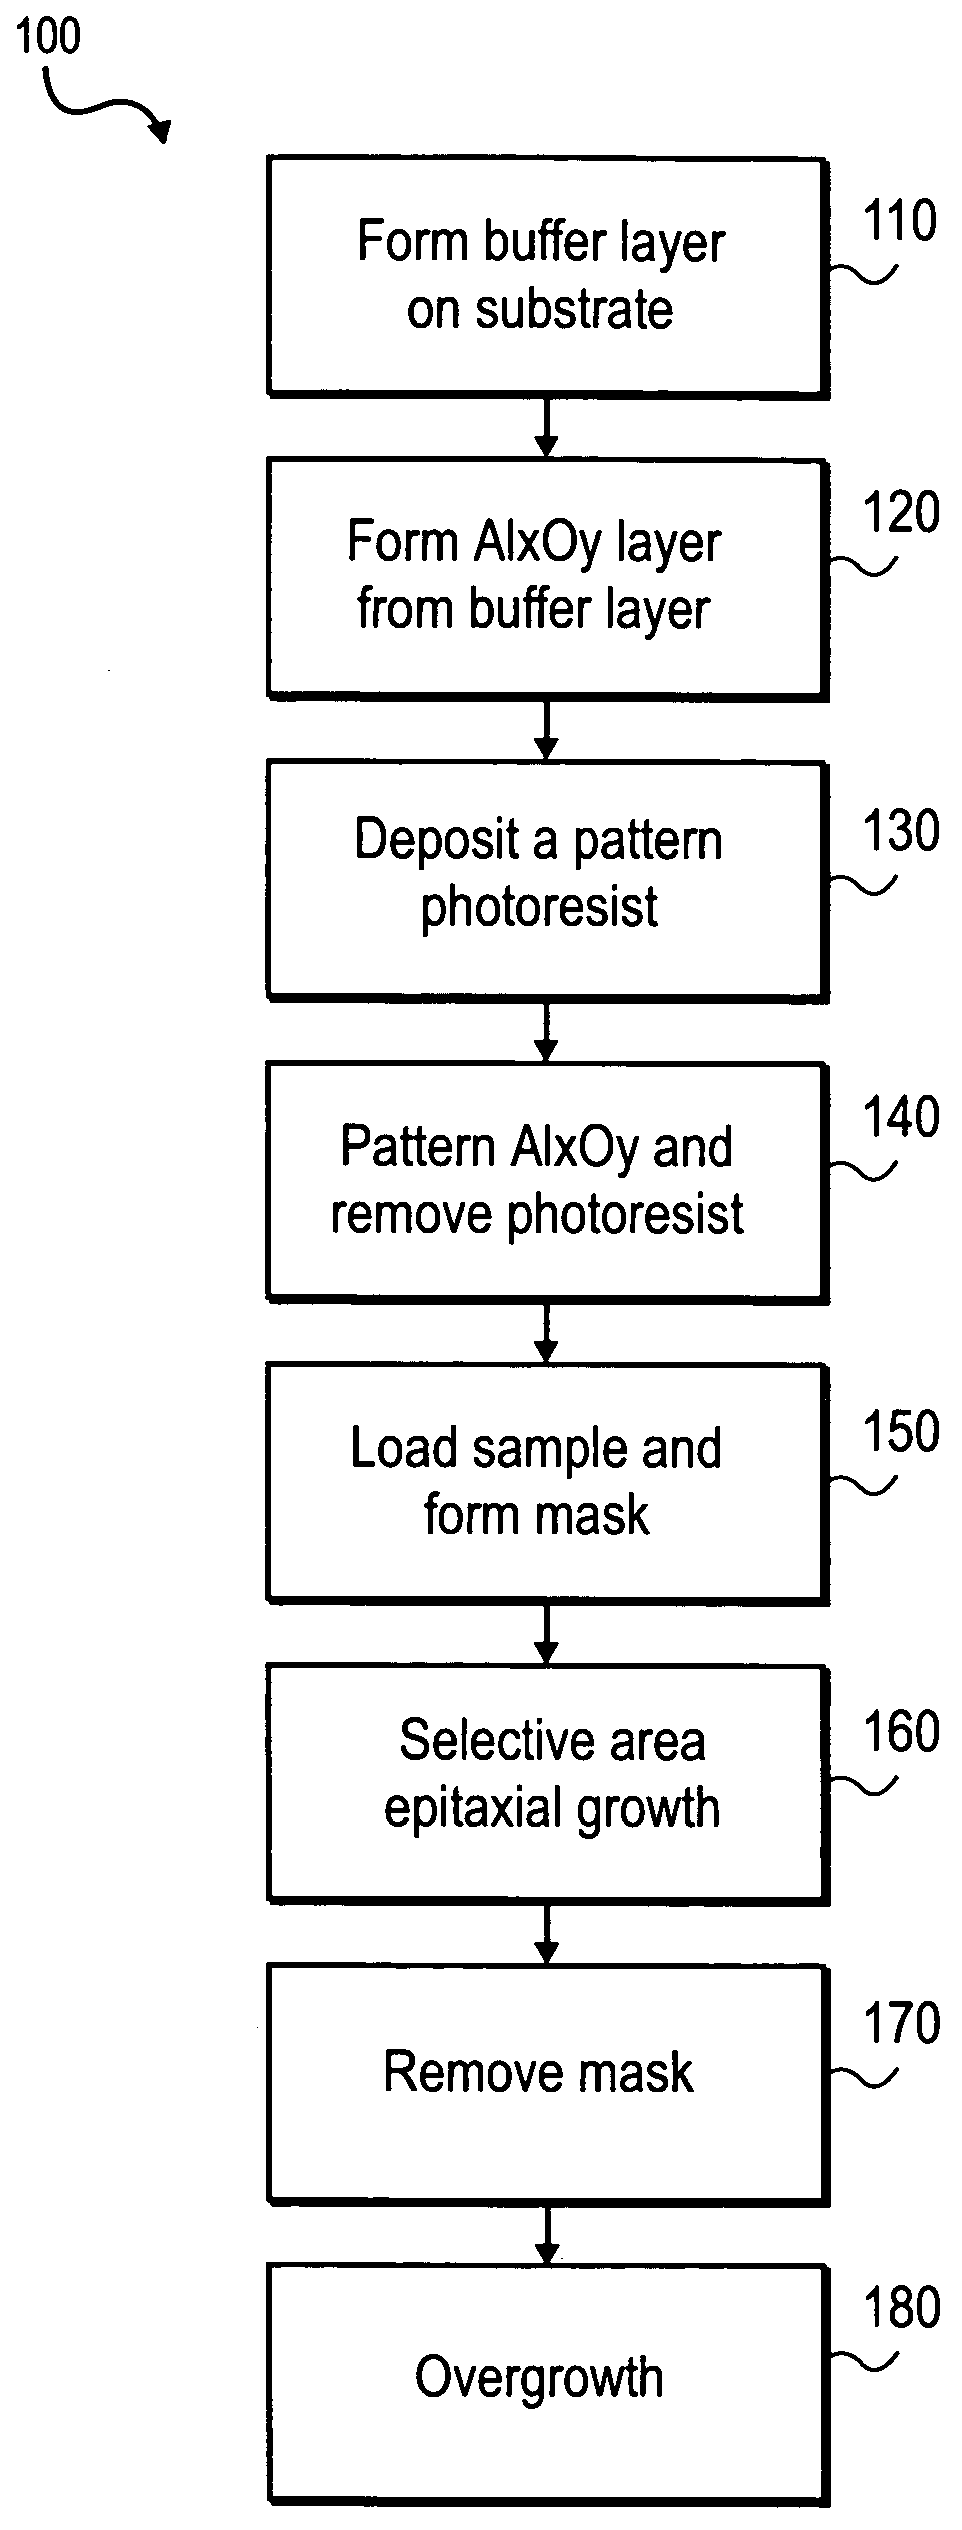 In-situ mask removal in selective area epitaxy using metal organic chemical vapor deposition